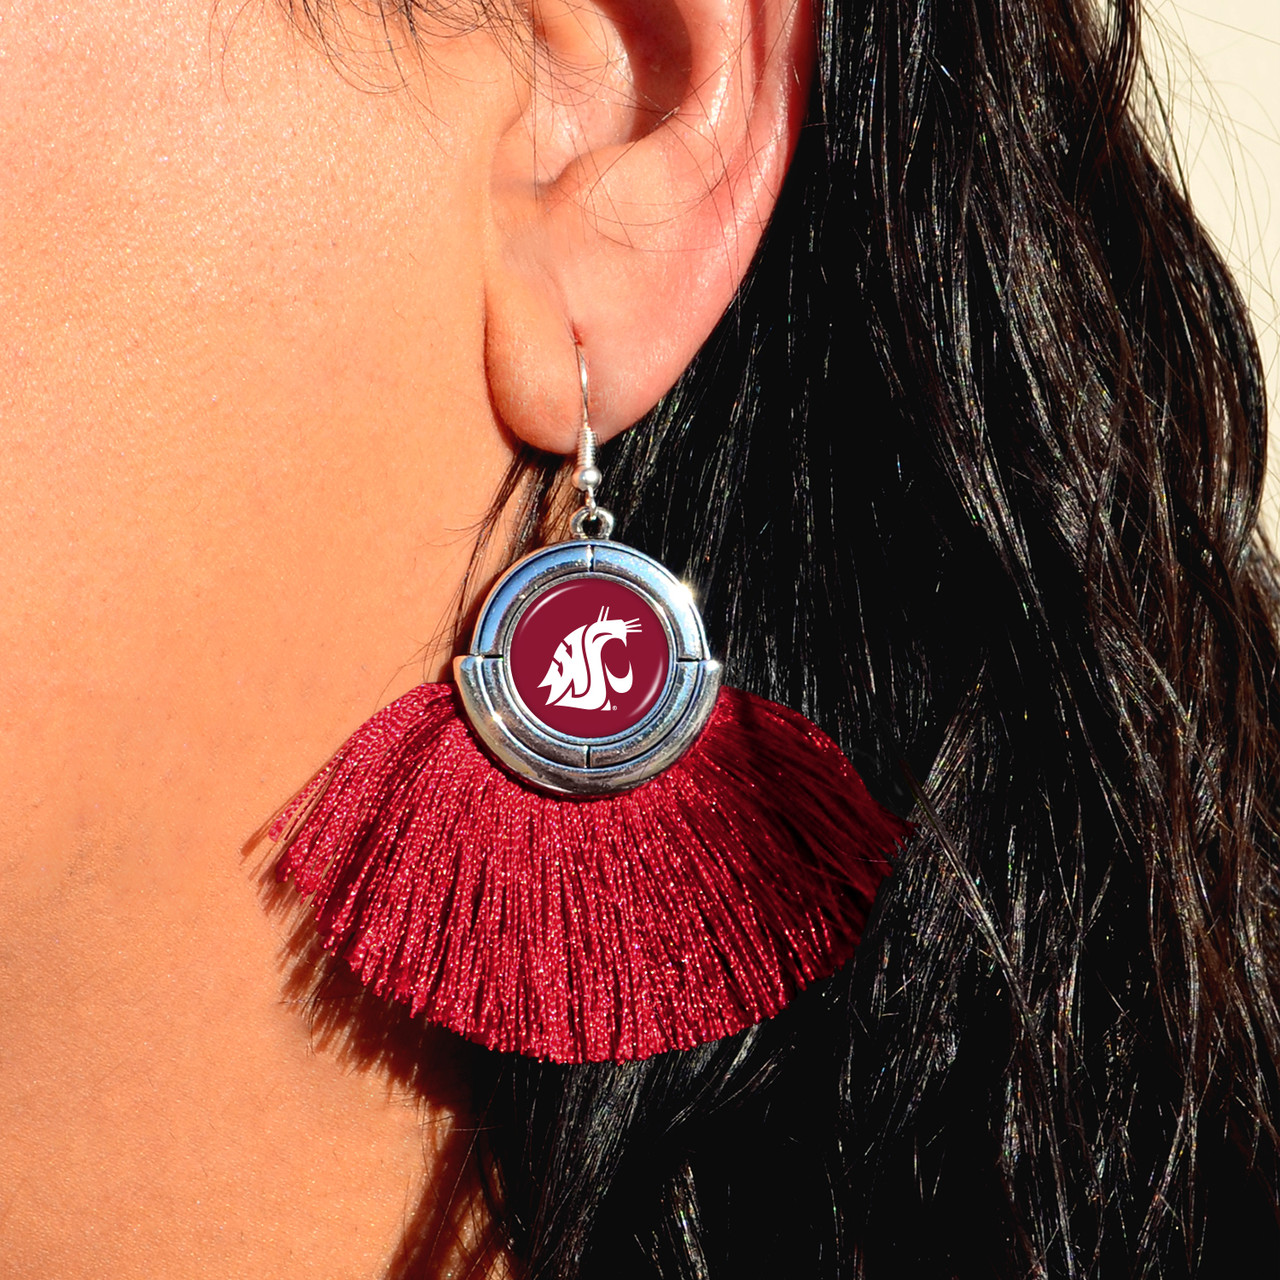 Washington State Cougars Earrings- No Strings Attached